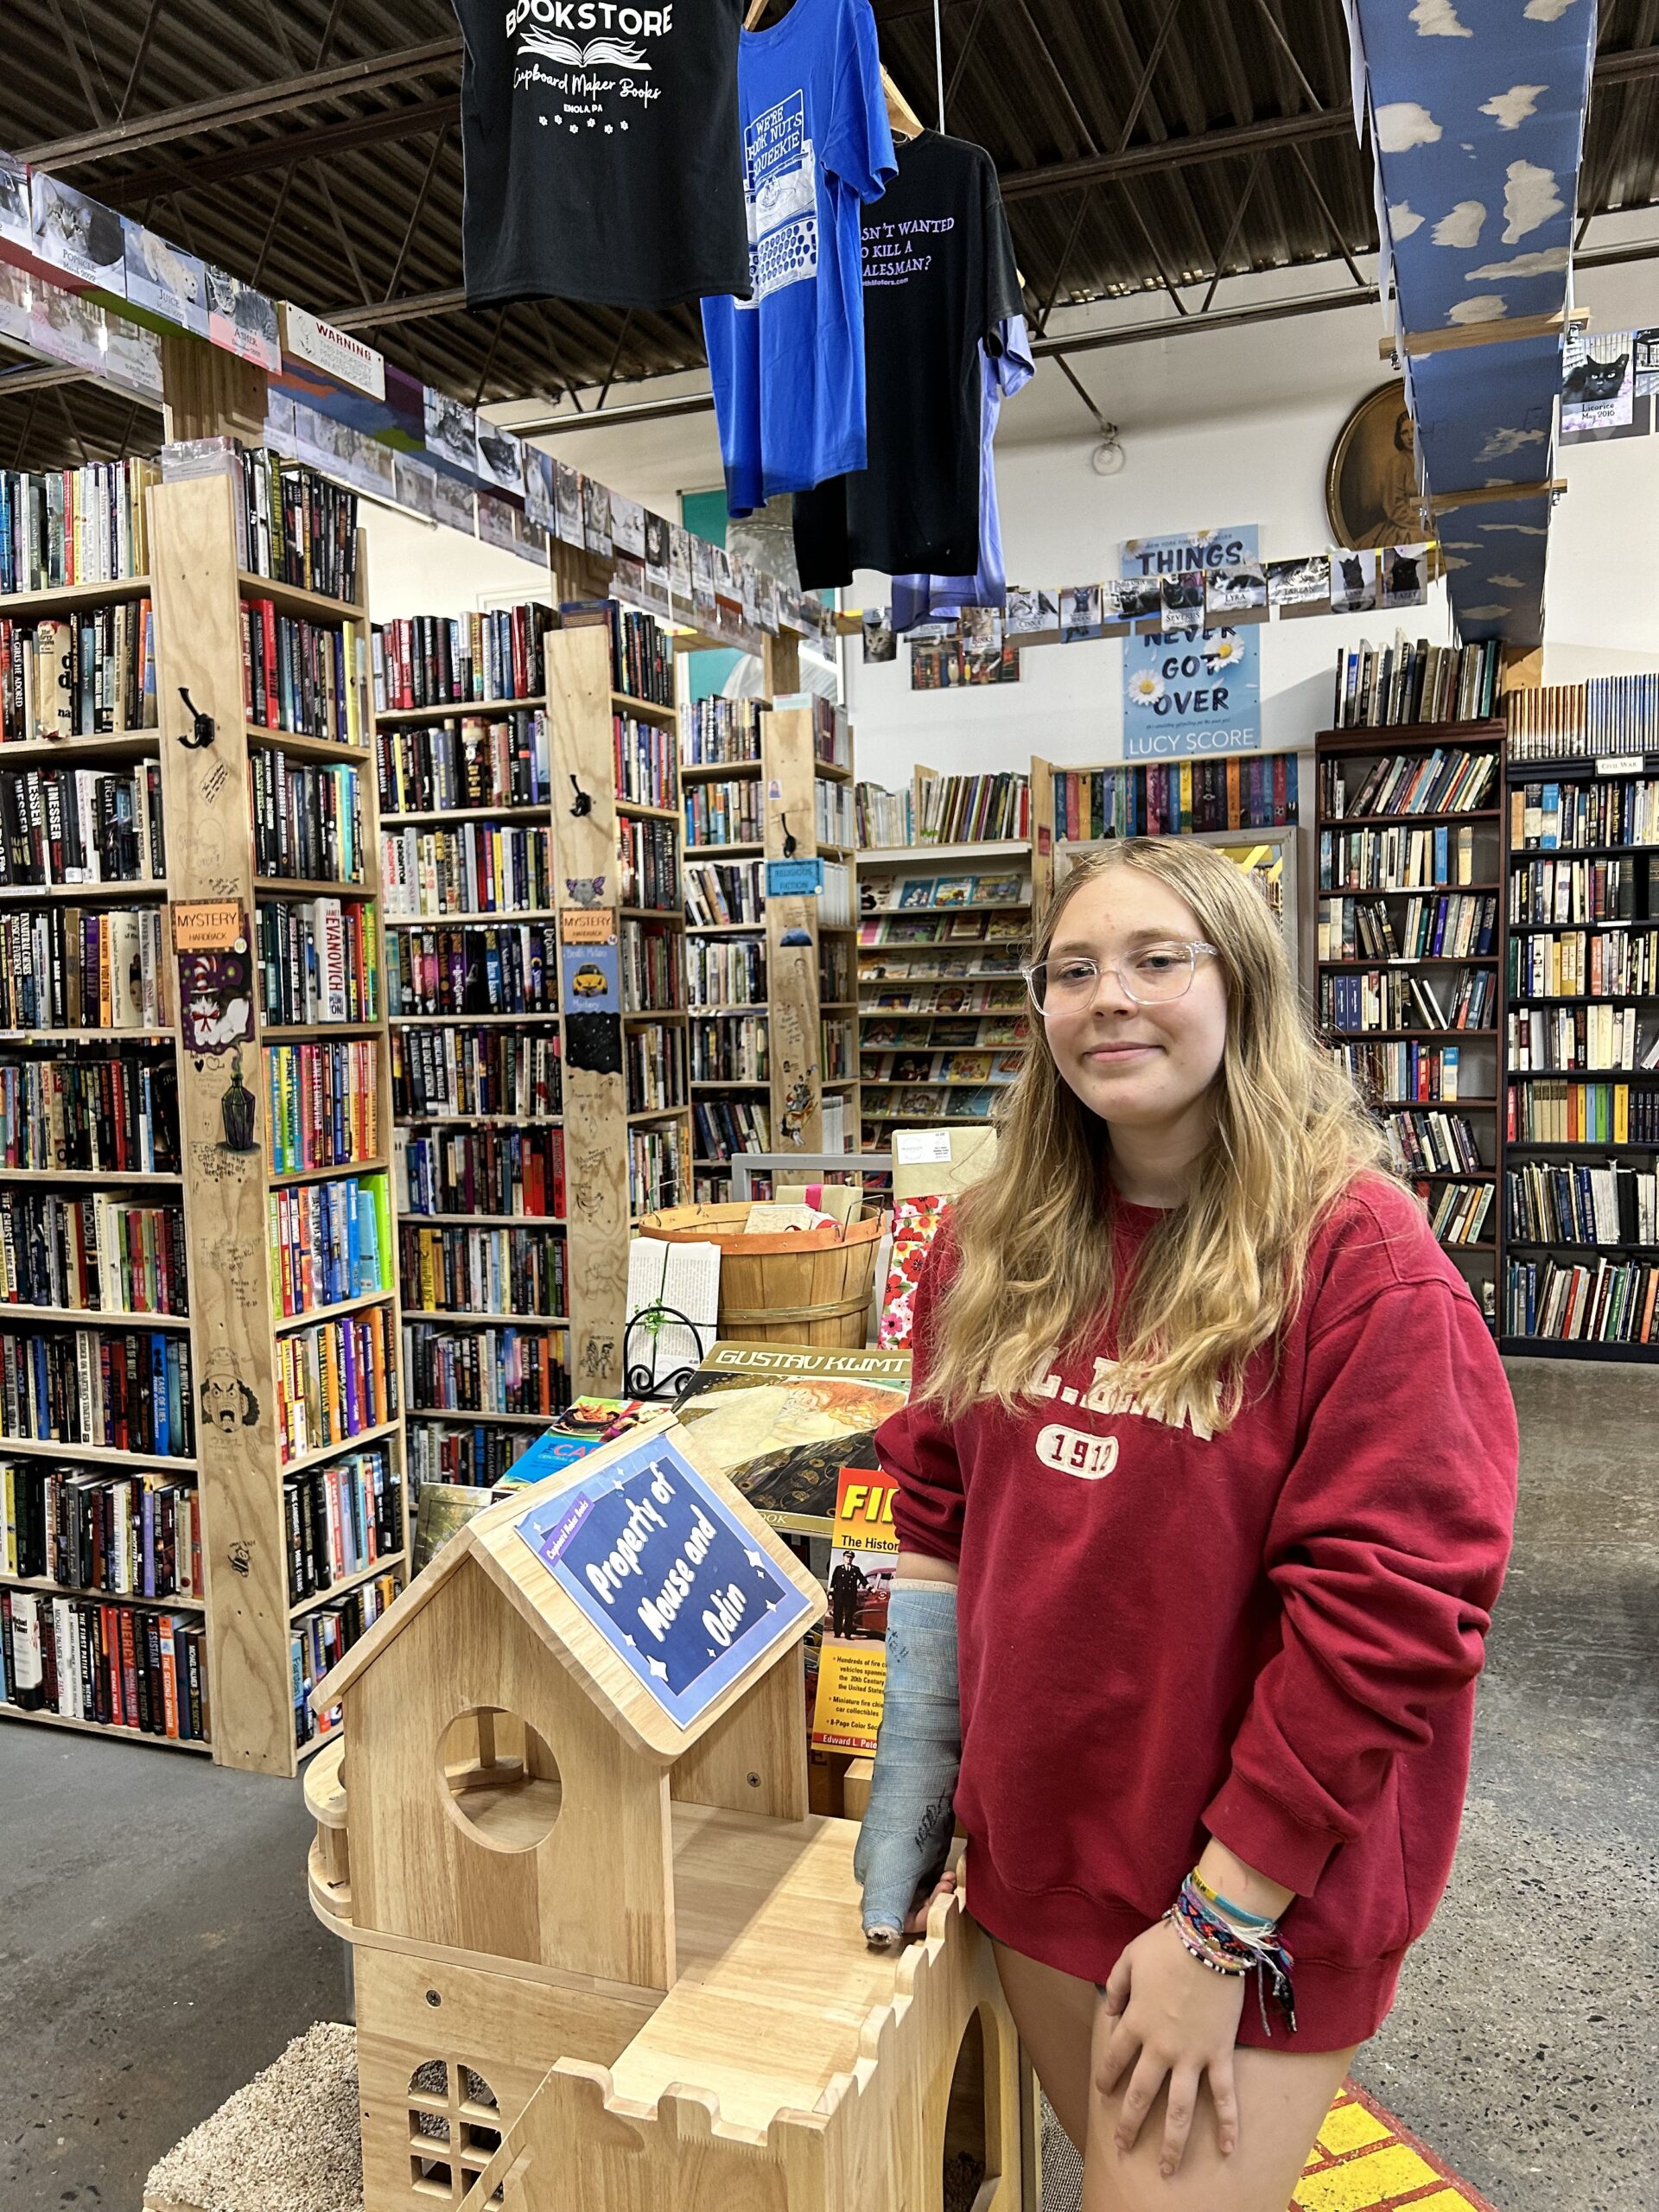 Woman with long blond hair and wearing a red sweatshirt in a well stocked bookstore, and standing beside a mid-sized cat habitat with a sign on a roof side that says "Property of Mouse and Odin," two of the cats who live permanently in the Cupboard Maker Books store in Enola, Pennsylvania.